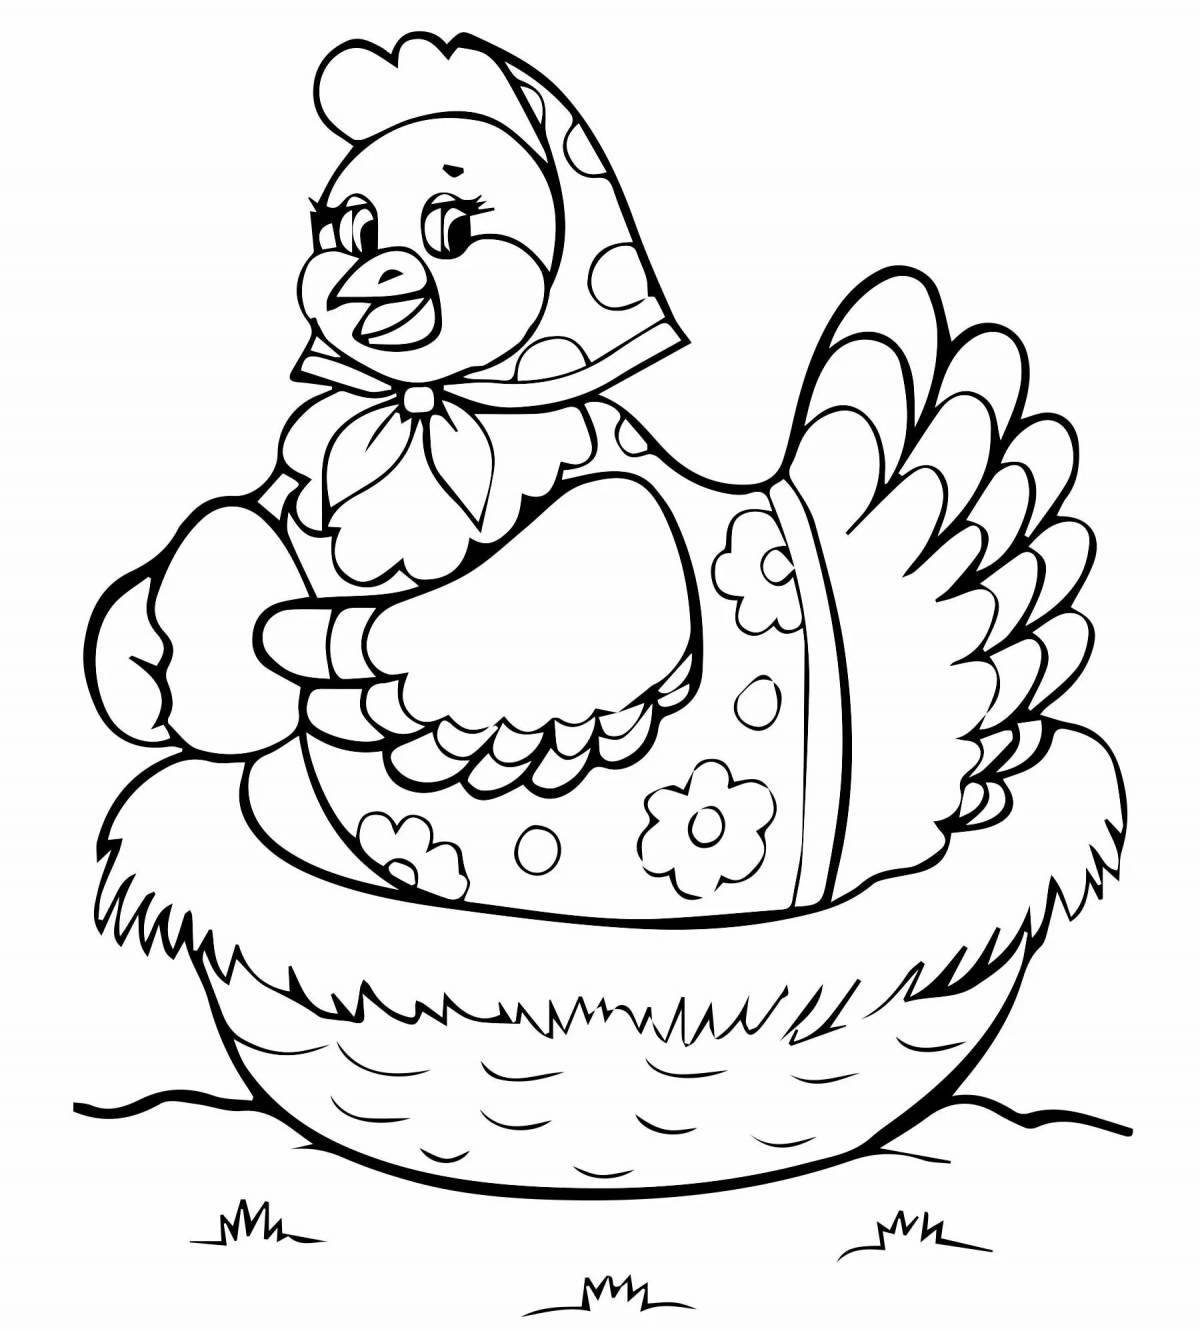 Unique ruffled chicken coloring book for the little ones